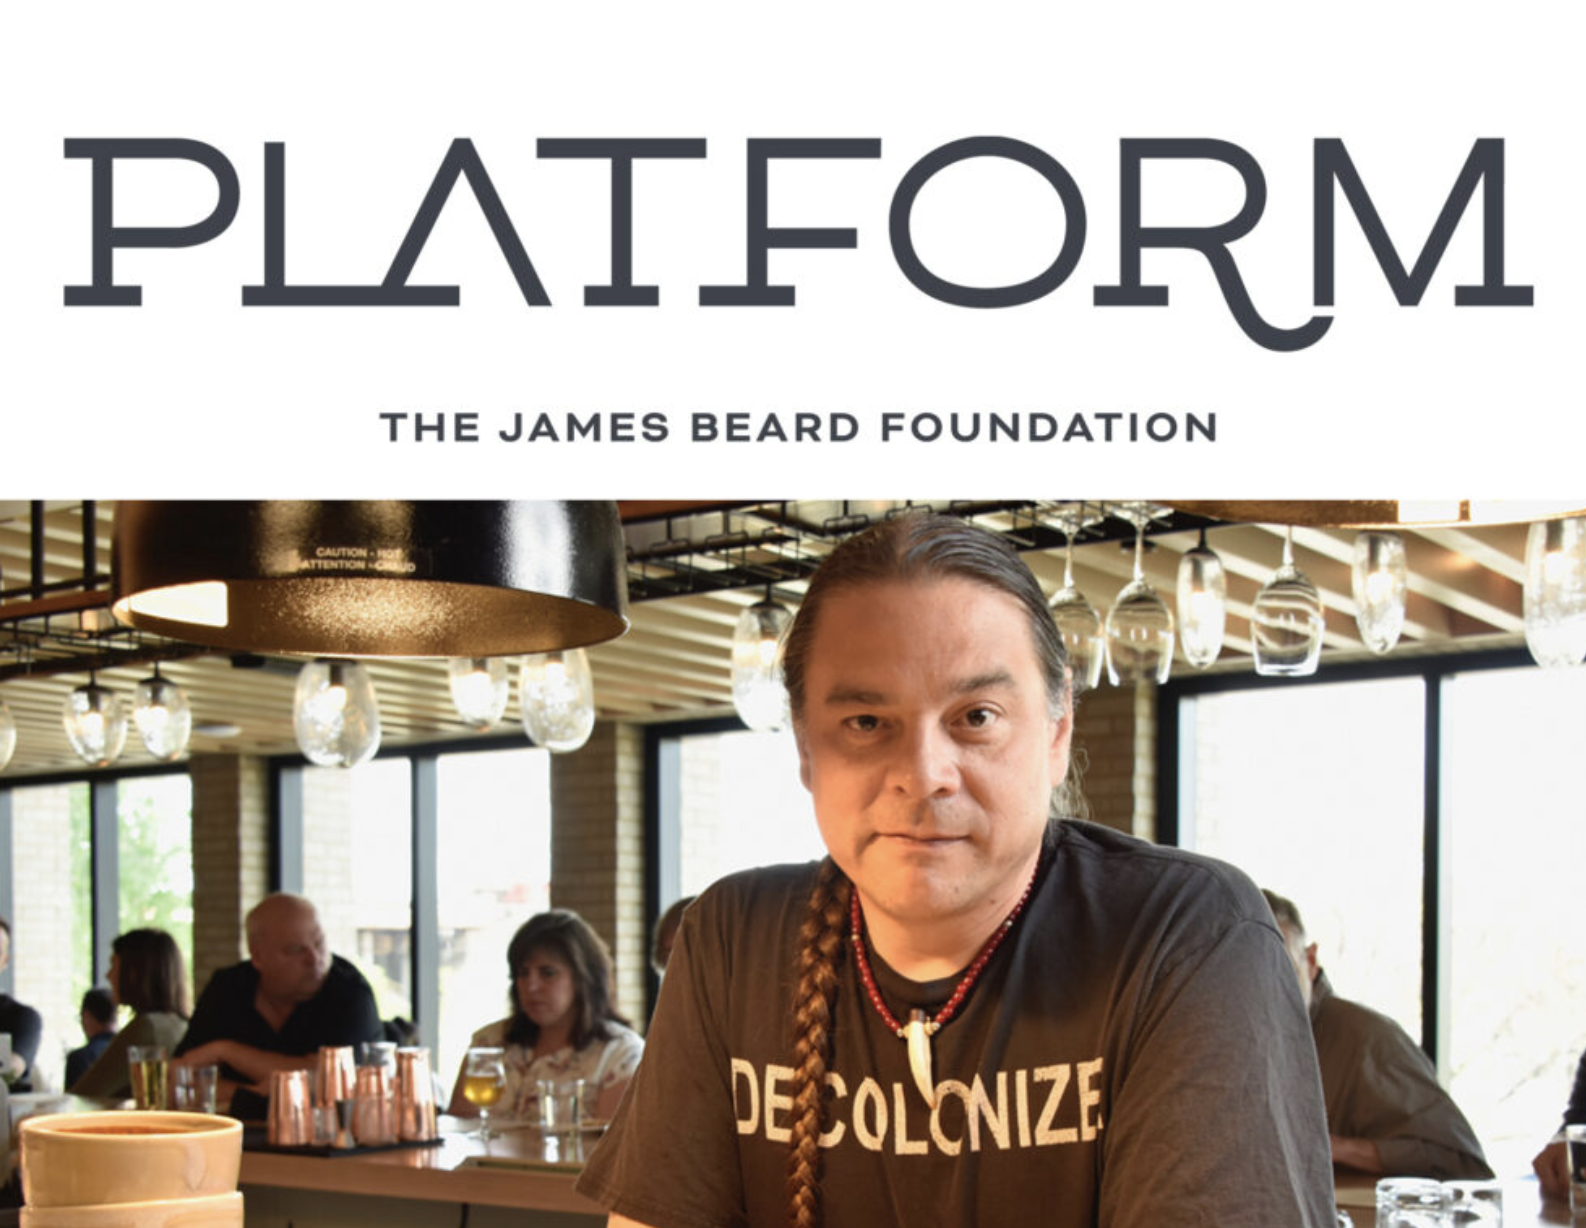 RESIDENCY AT JAMES BEARD FOUNDATION SPACE IN NYC MAY 7- 11